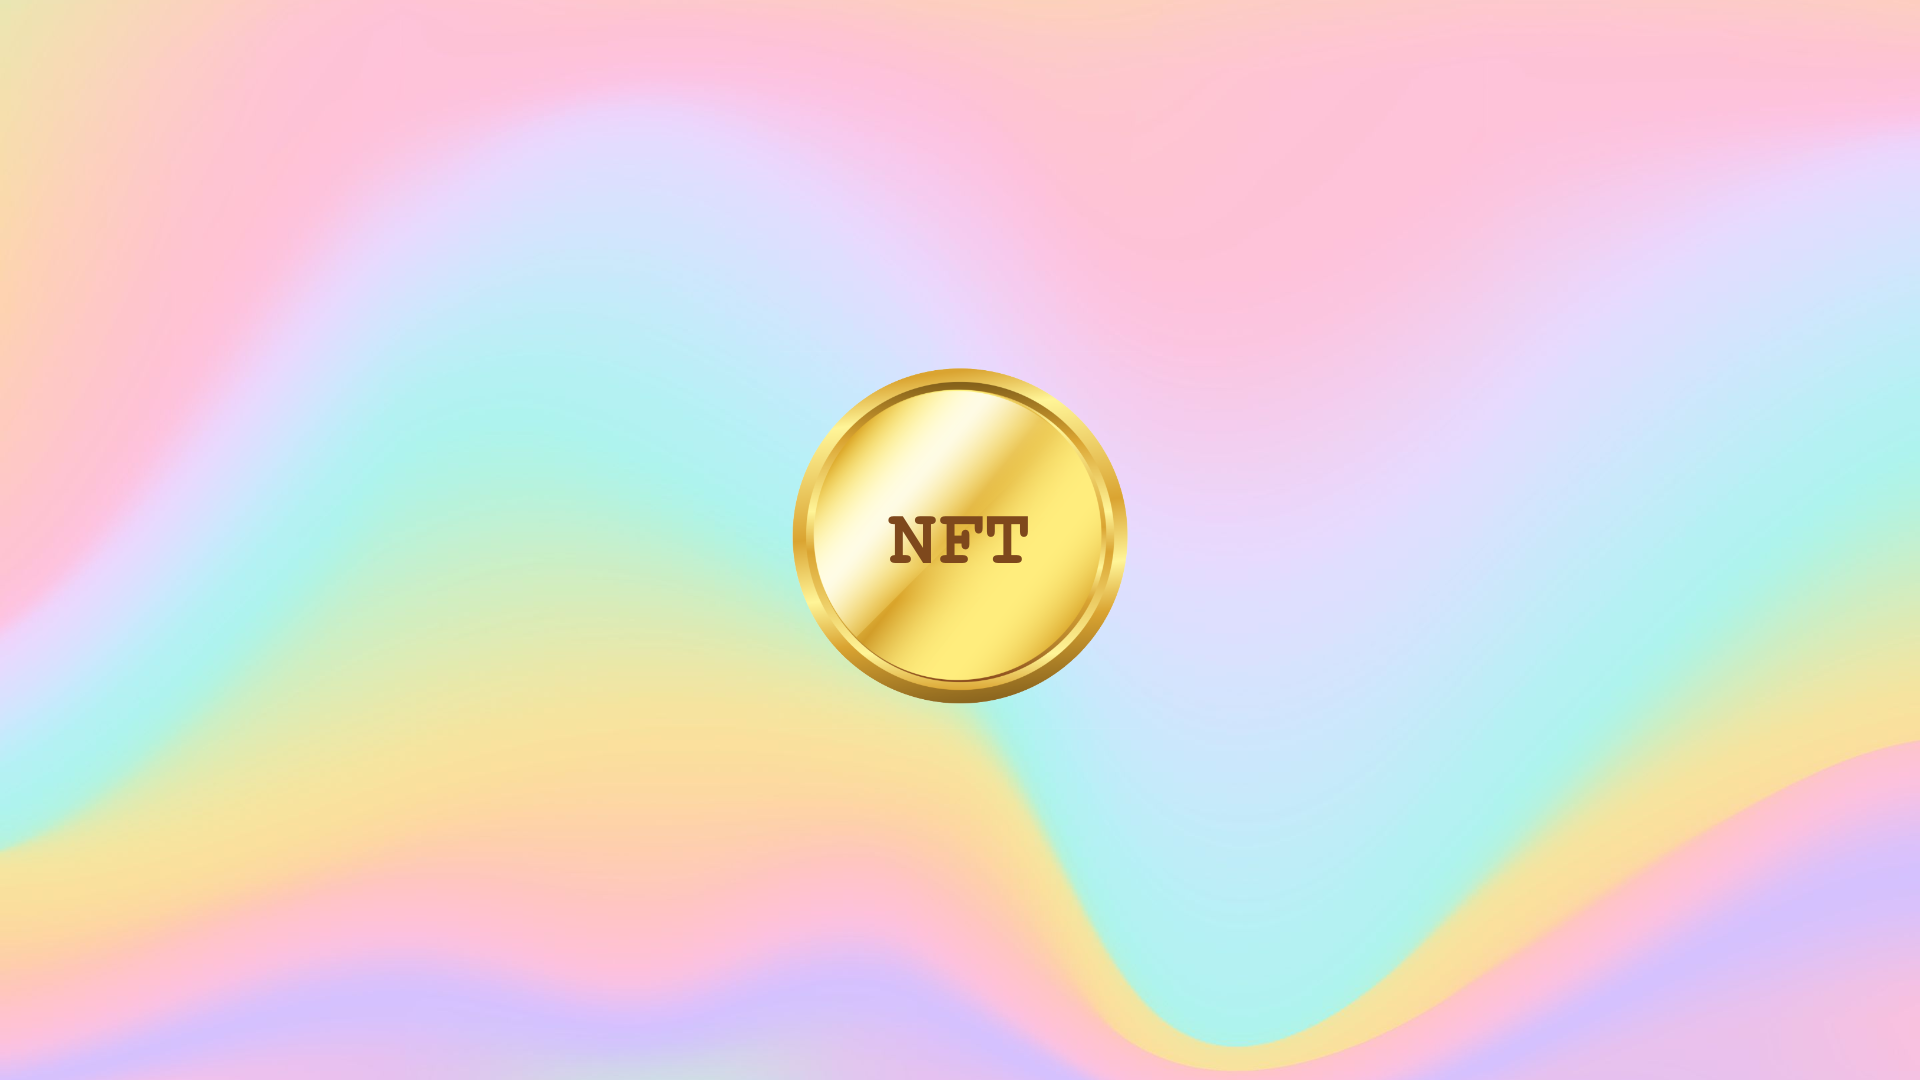 A digital photograph of a landscape is sold as a non-fungible token (NFT), a unique digital asset that is stored on a blockchain and cannot be replicated.